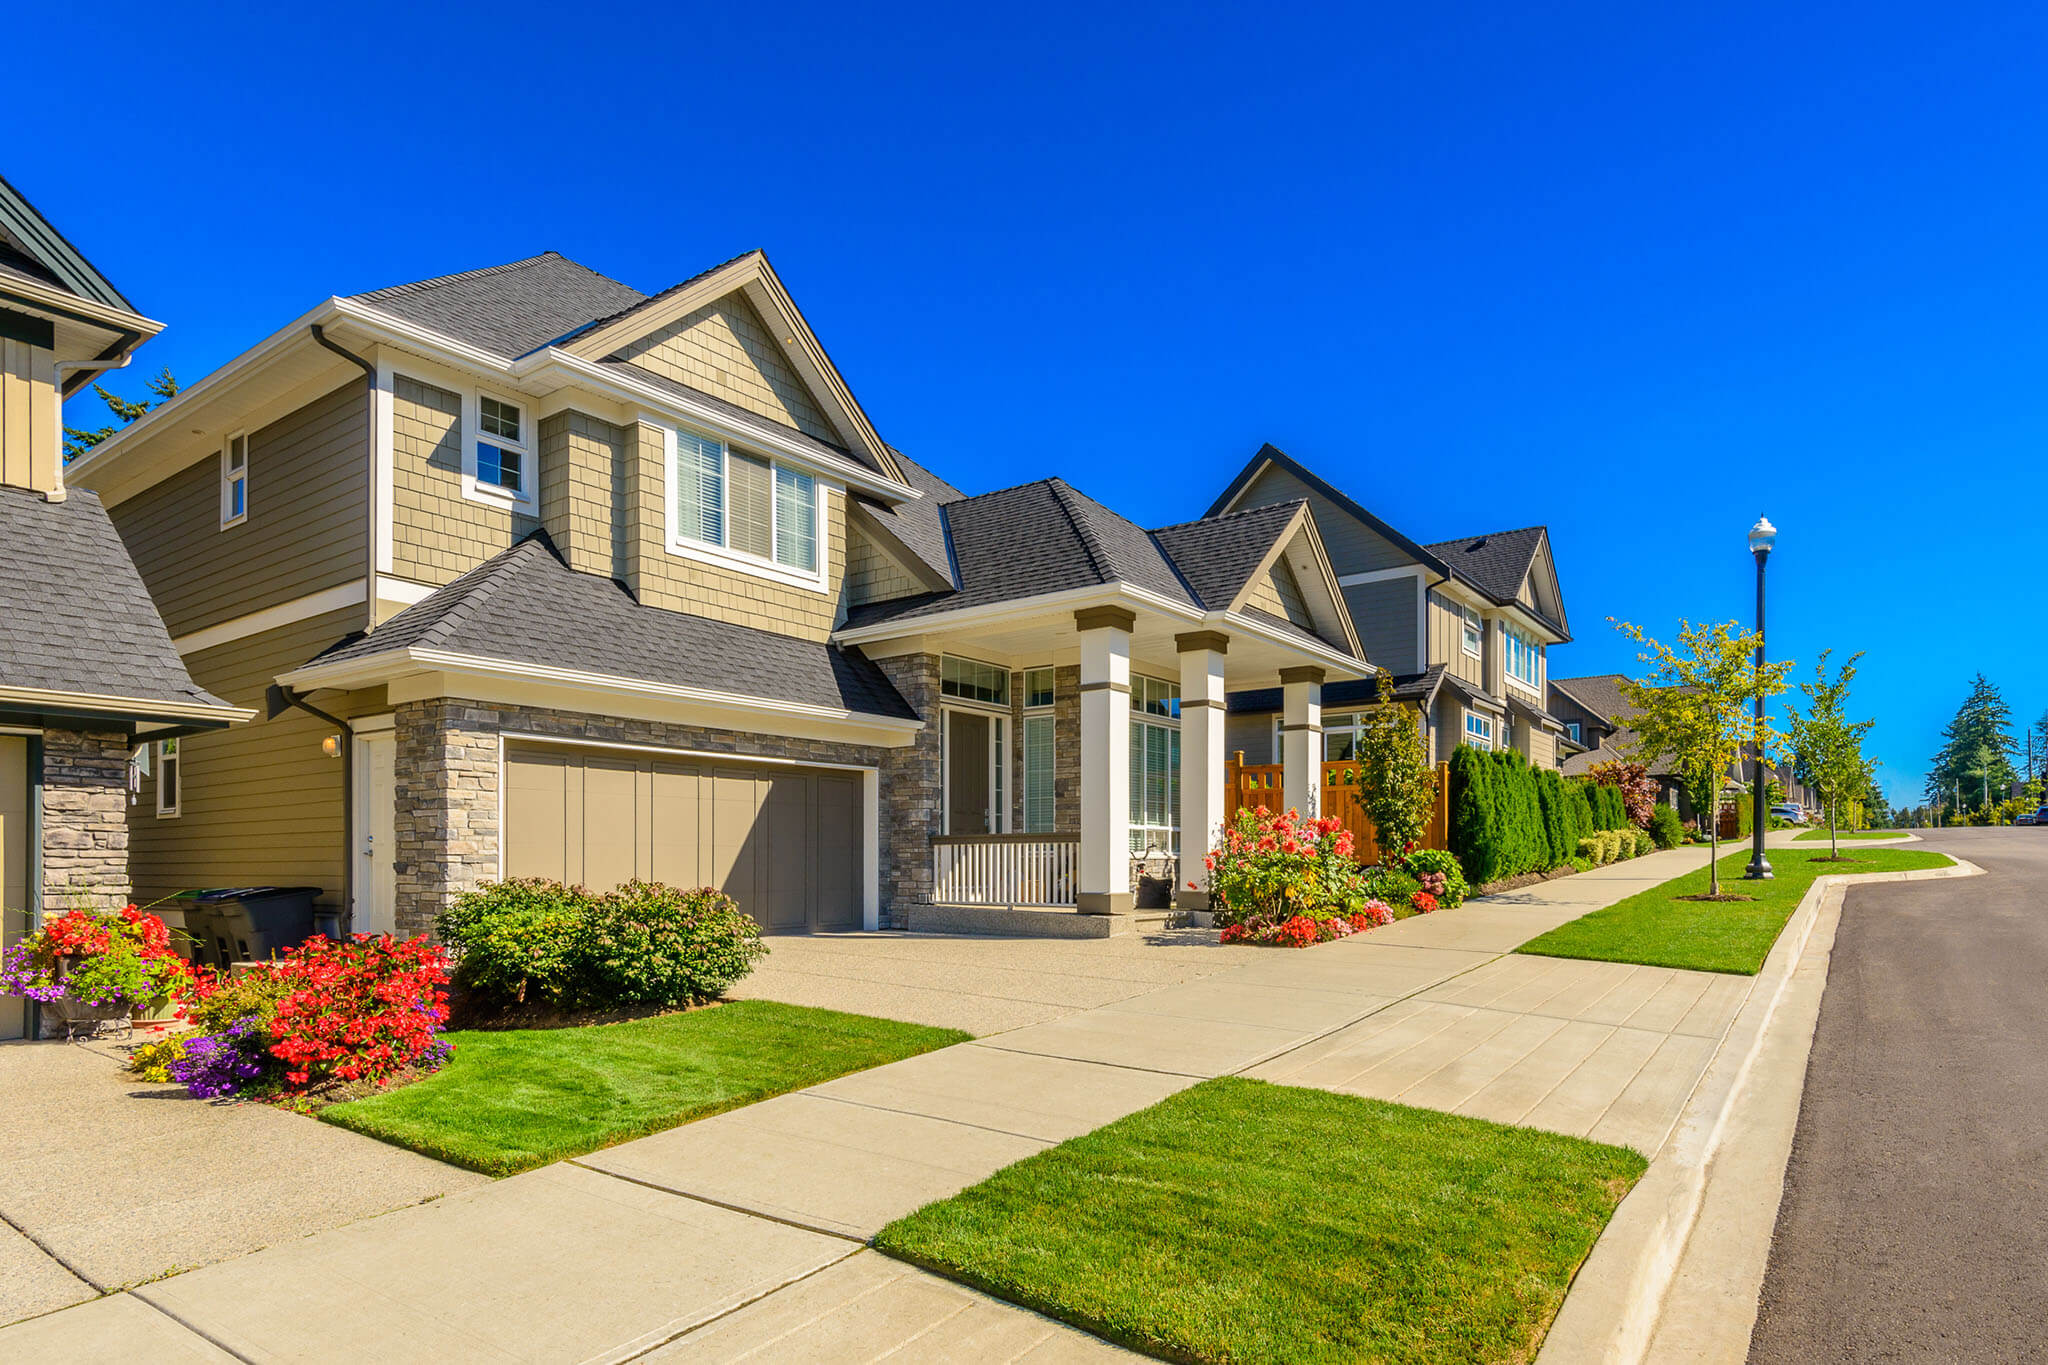 Tips to get homeowners to deepen their interest in the place you all call home.